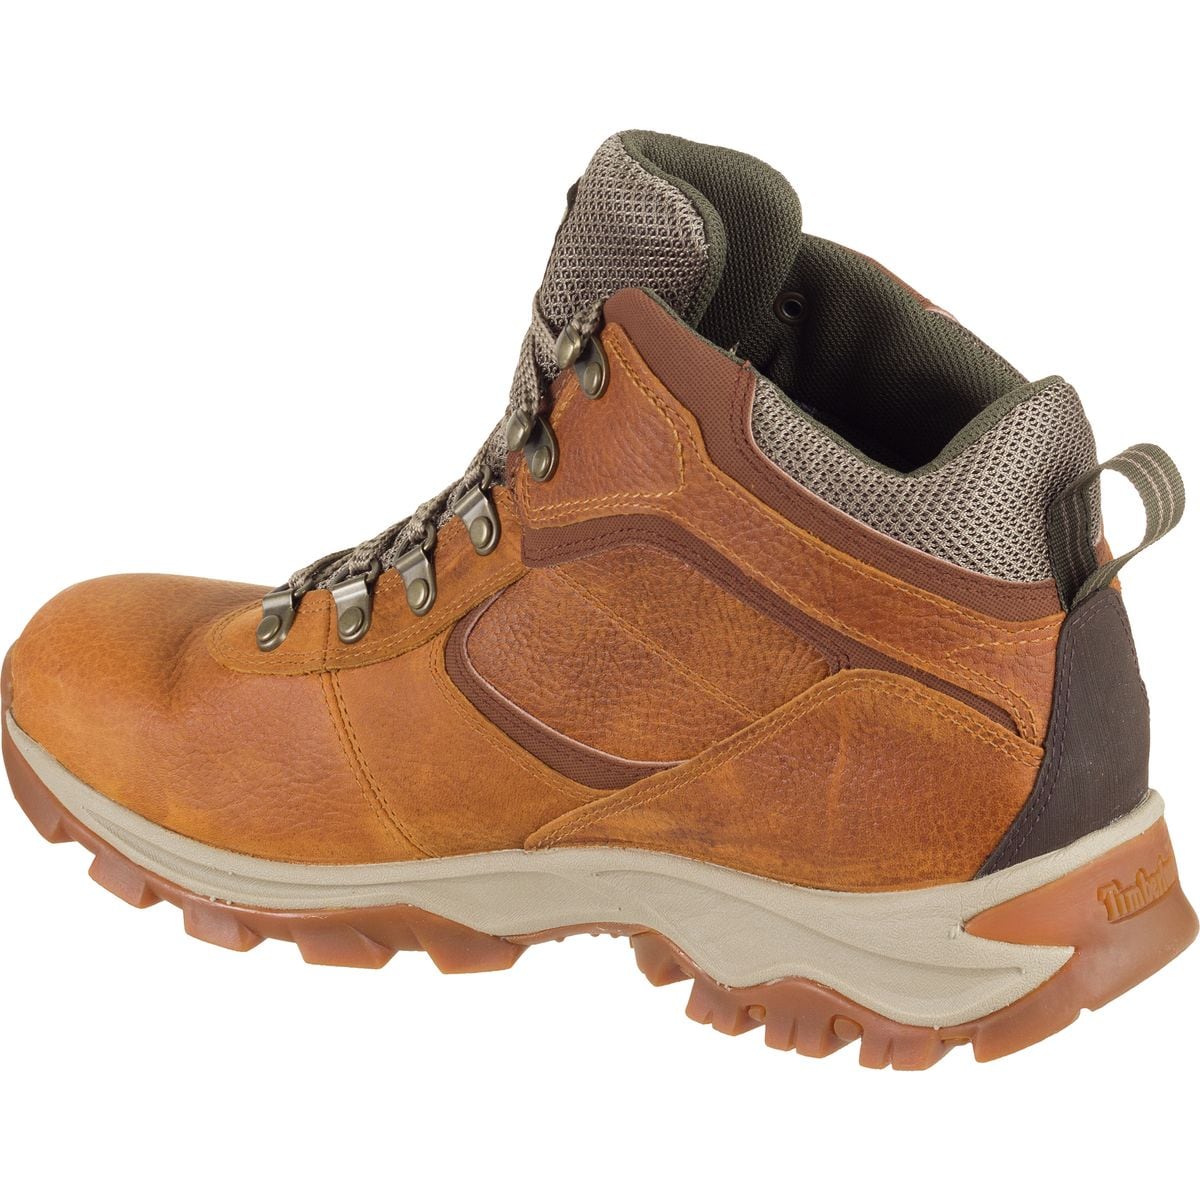 Timberland Mt. Maddsen Mid Waterproof Hiking Boot - Men's | Backcountry.com